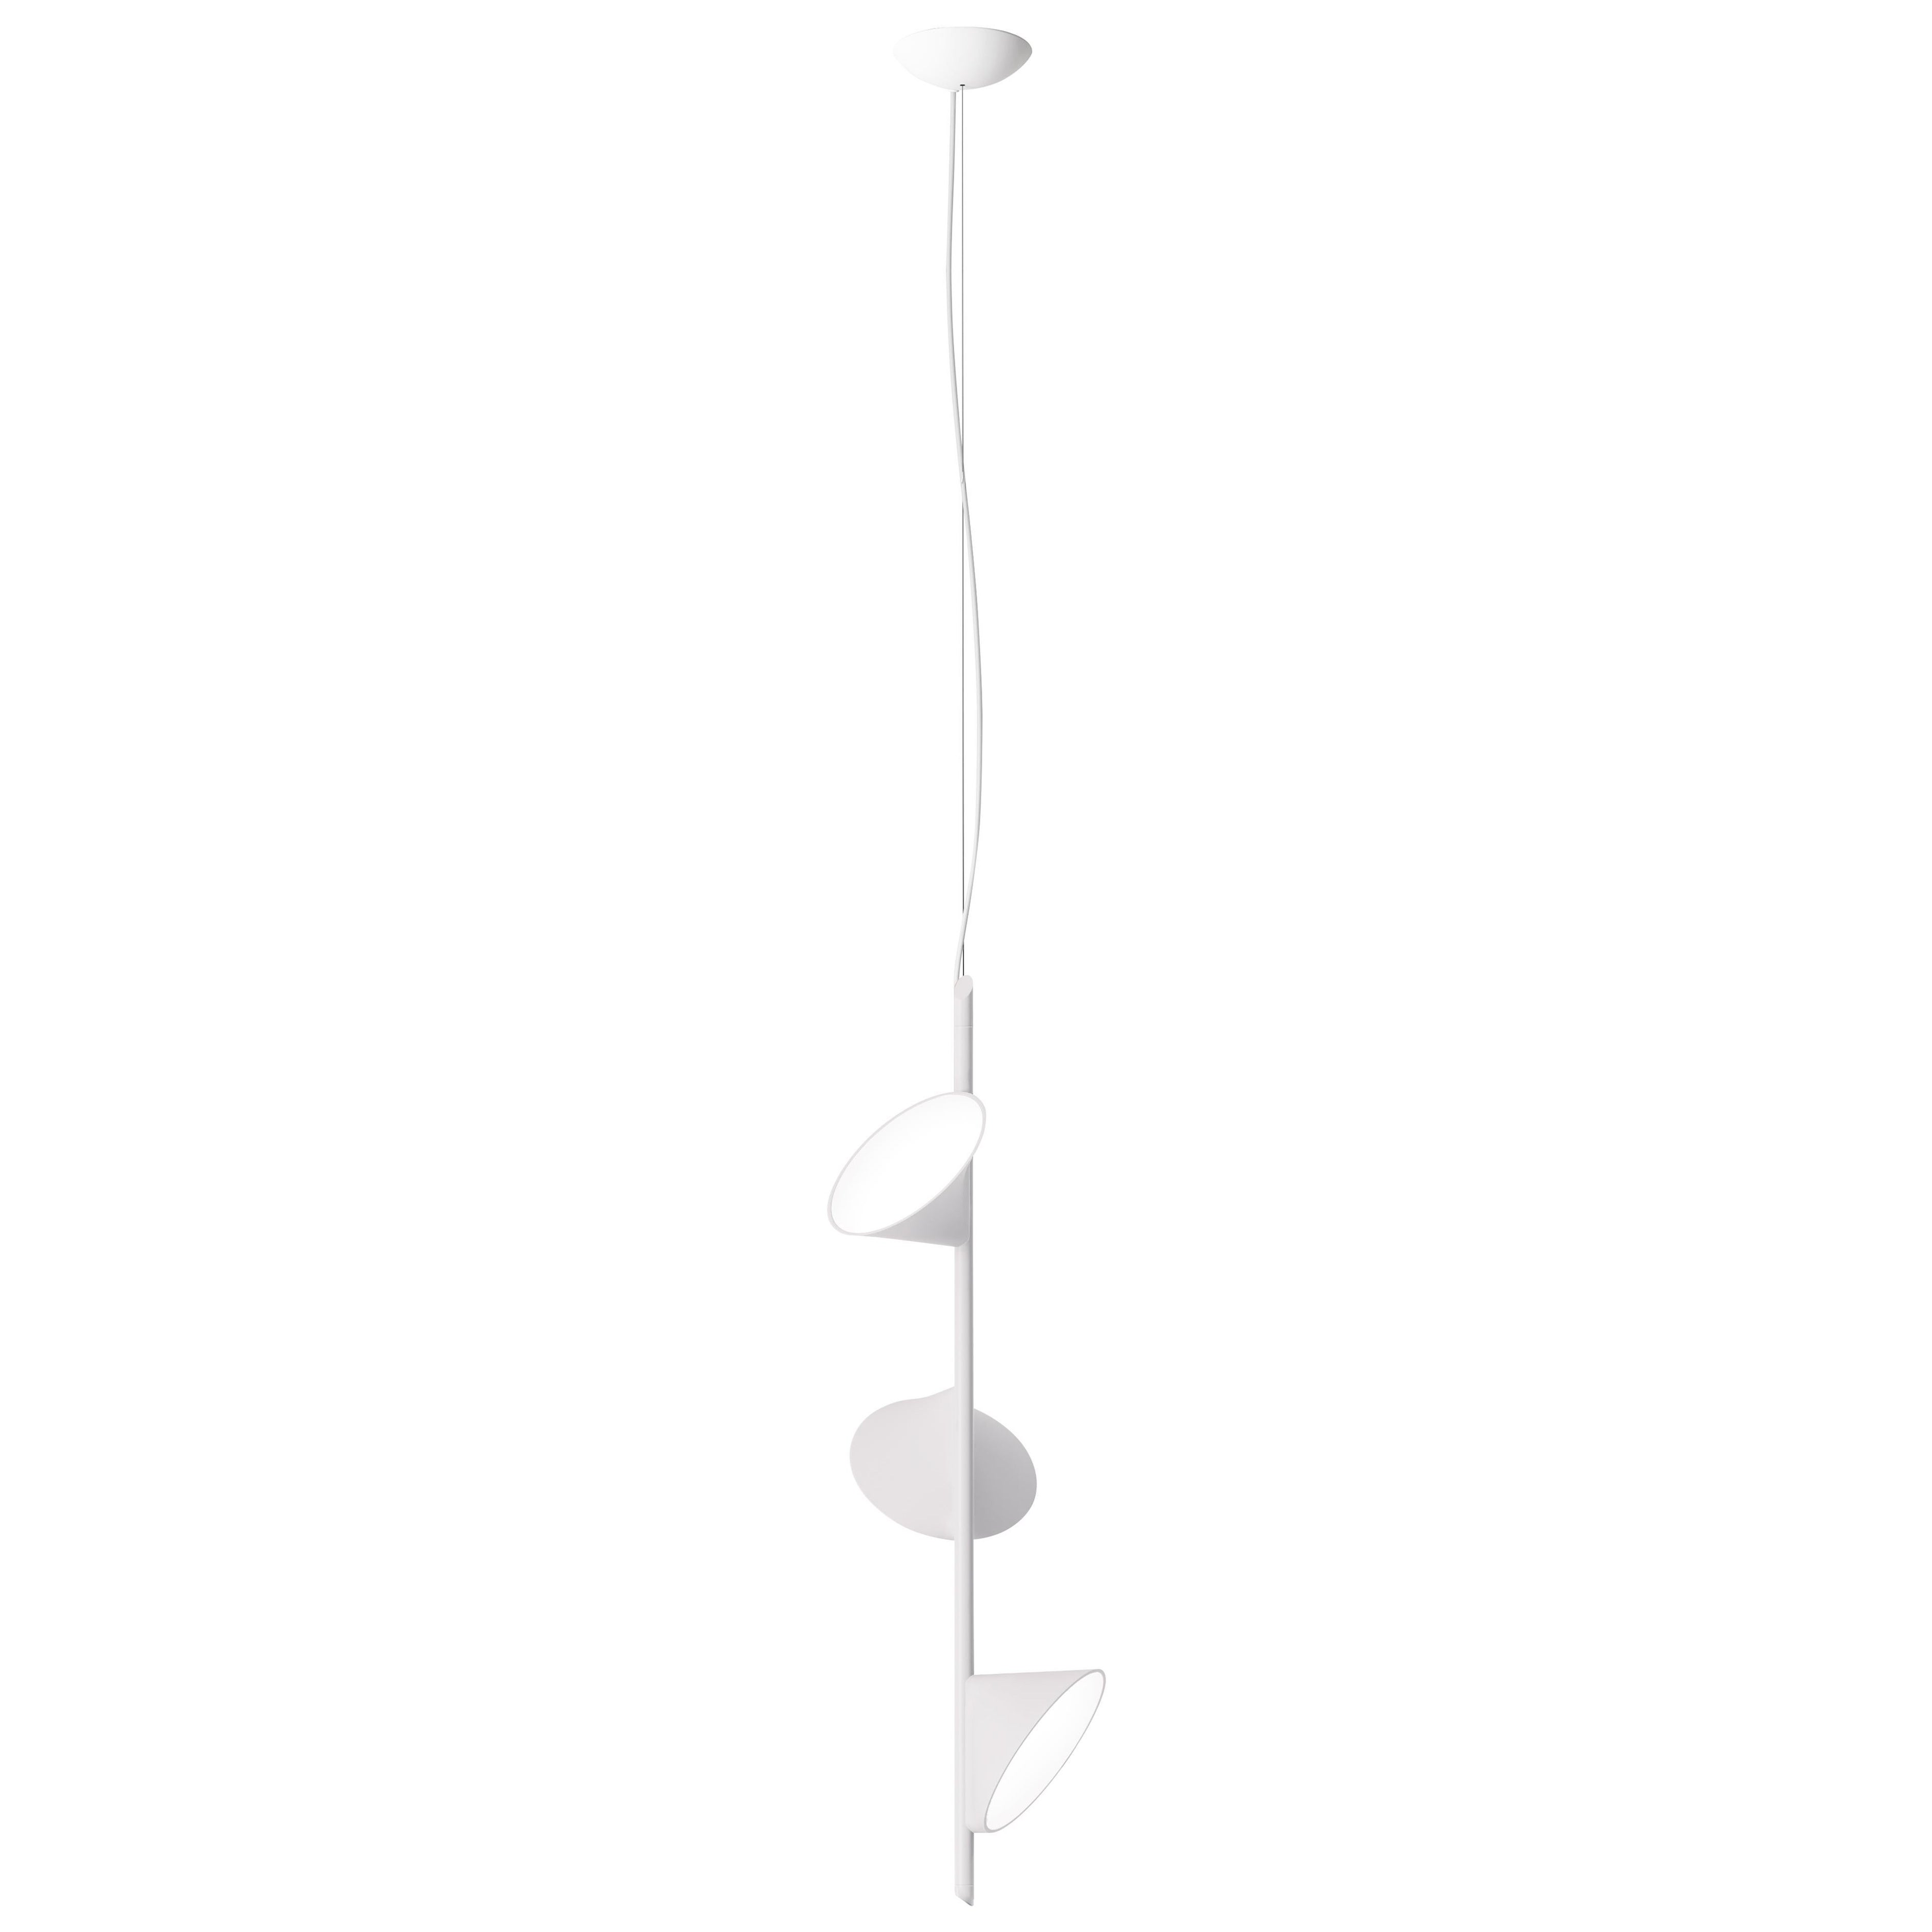 Axolight Orchid 3 Light Pendant Lamp with Aluminum Body in White byRainer Mutsch